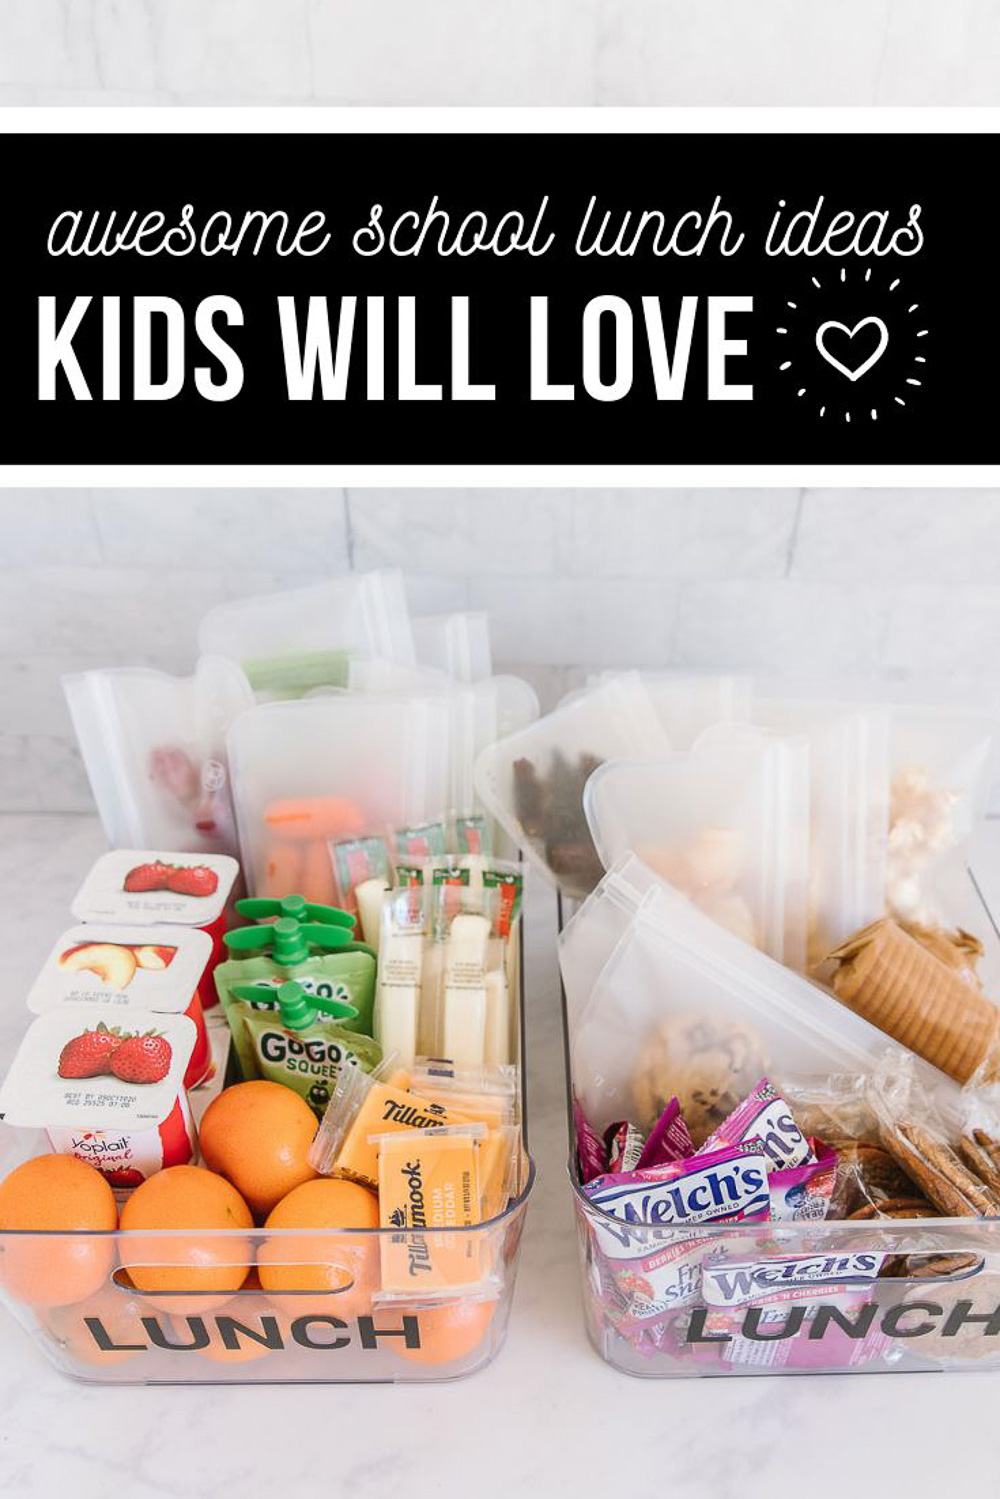 Awesome school lunch ideas kids will love. Bins with lunch ideas for kids. 